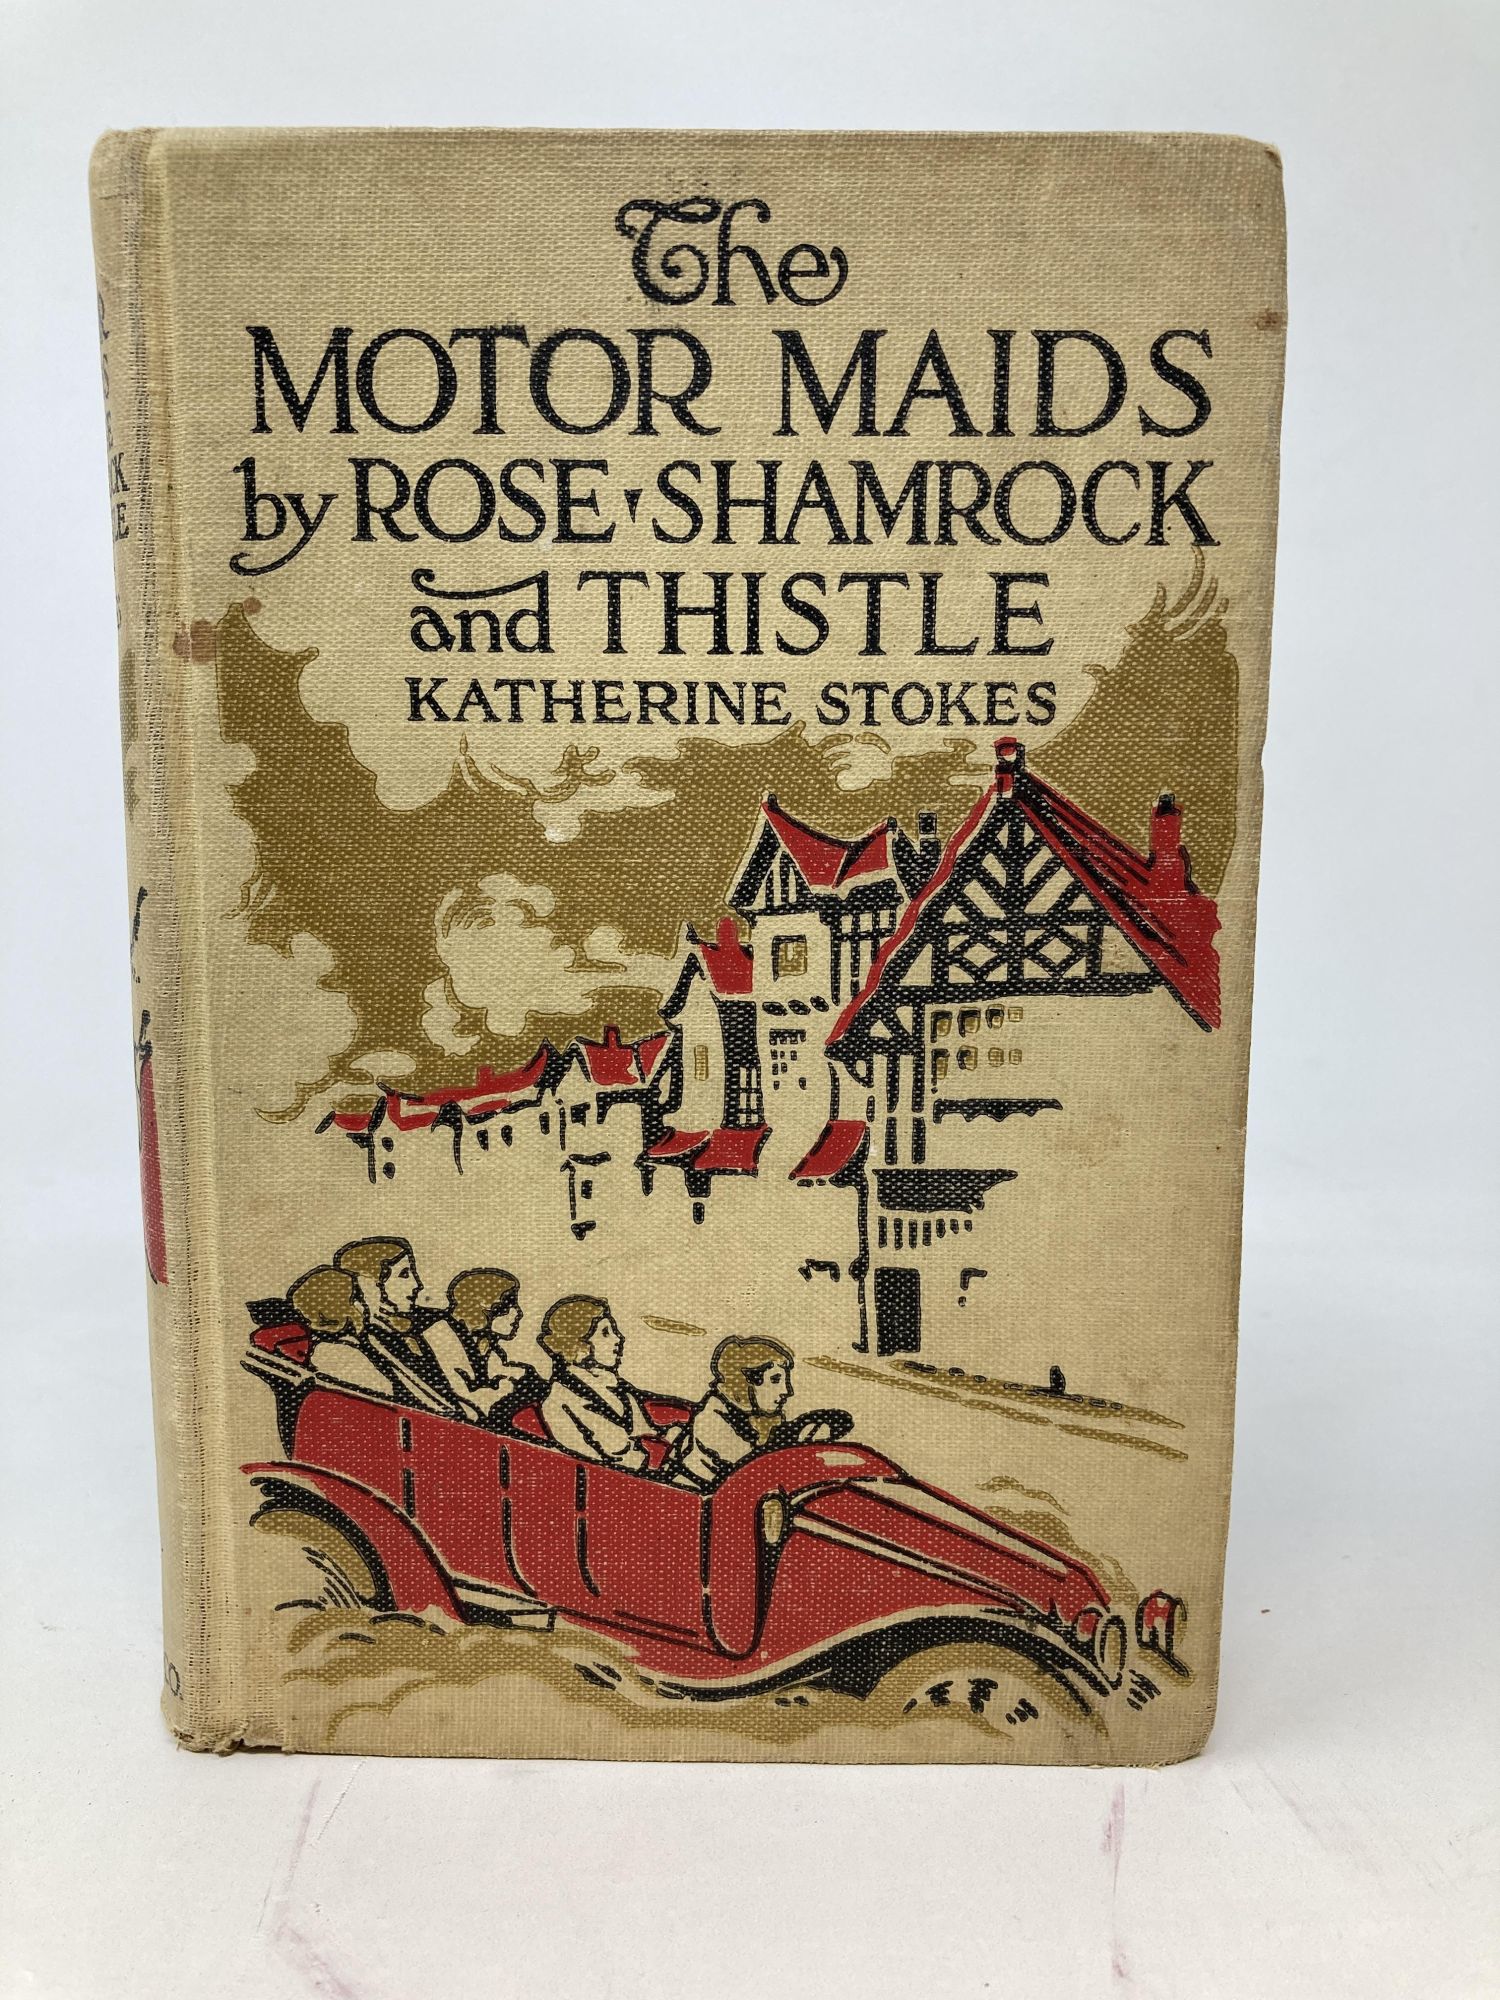 Stokes, Katherine - The Motor Maids by Rose, Shamrock and Thistle